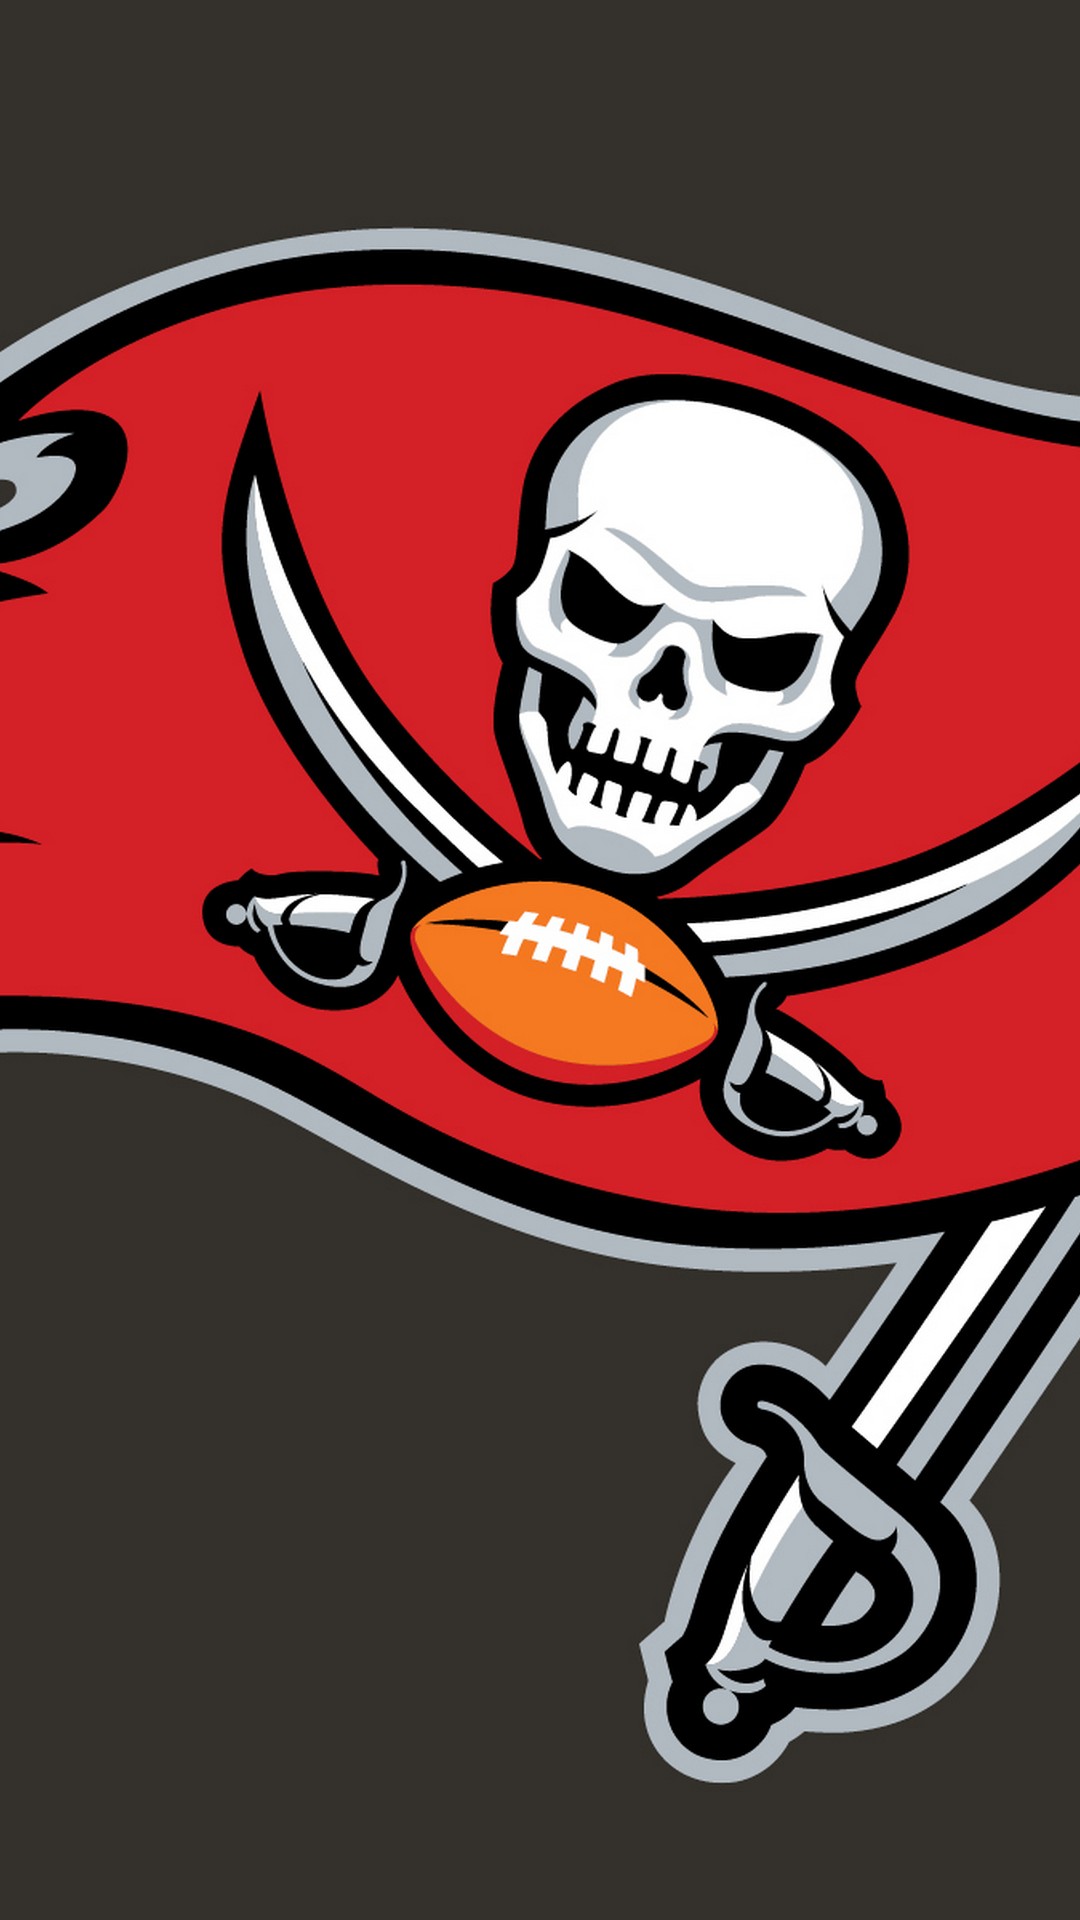 Tampa Bay Buccaneers Logo iPhone Wallpaper New With high-resolution 1080X1920 pixel. Donwload and set as wallpaper for your iPhone X, iPhone XS home screen backgrounds, XS Max, XR, iPhone8 lock screen wallpaper, iPhone 7, 6, SE, and other mobile devices